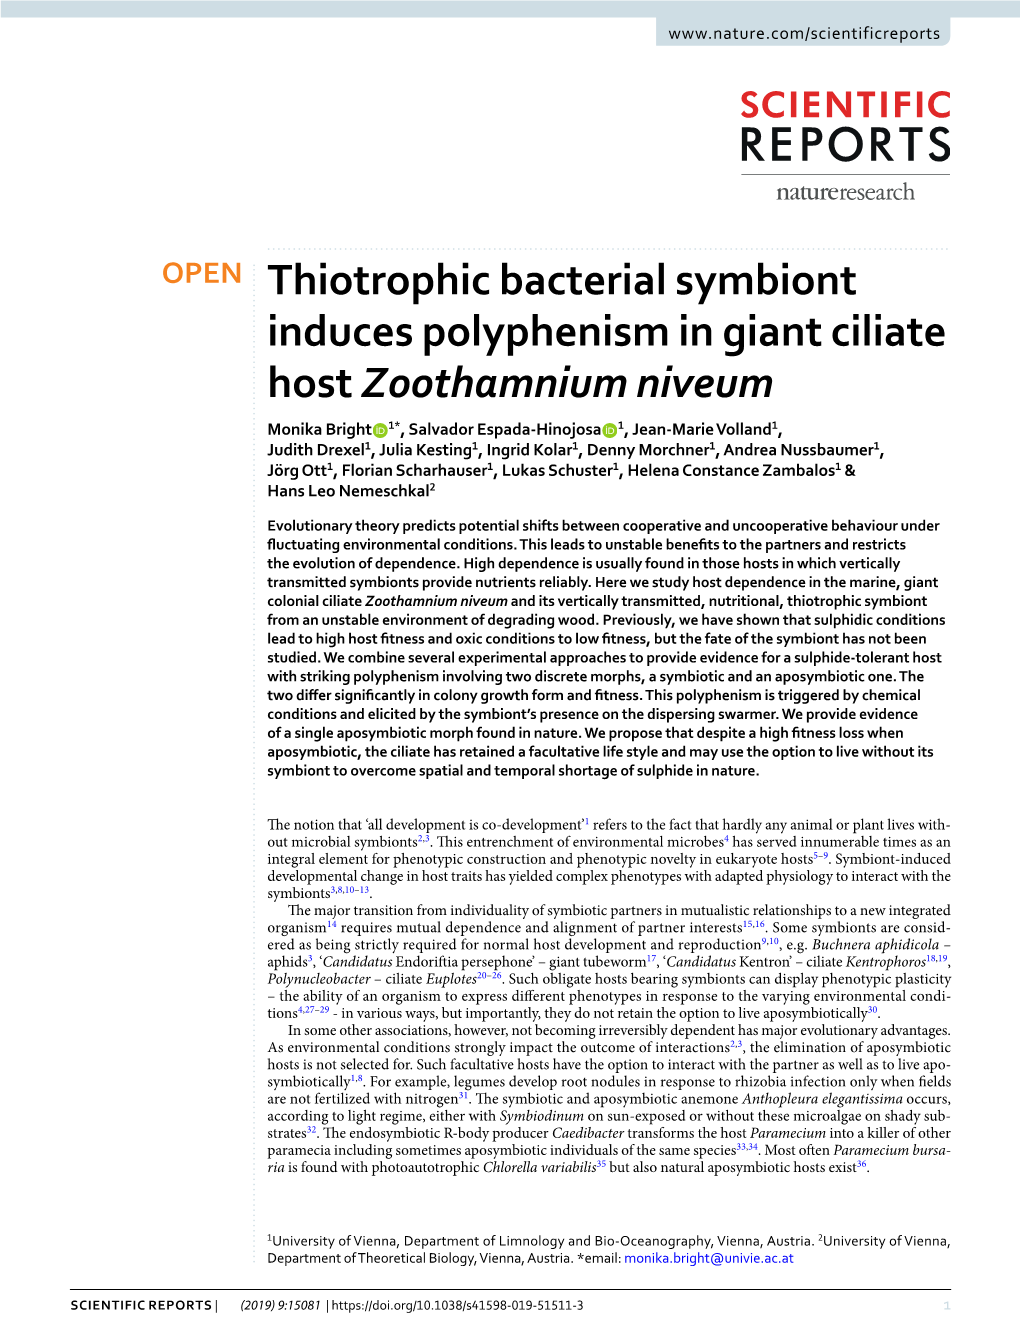 Thiotrophic Bacterial Symbiont Induces Polyphenism in Giant Ciliate Host